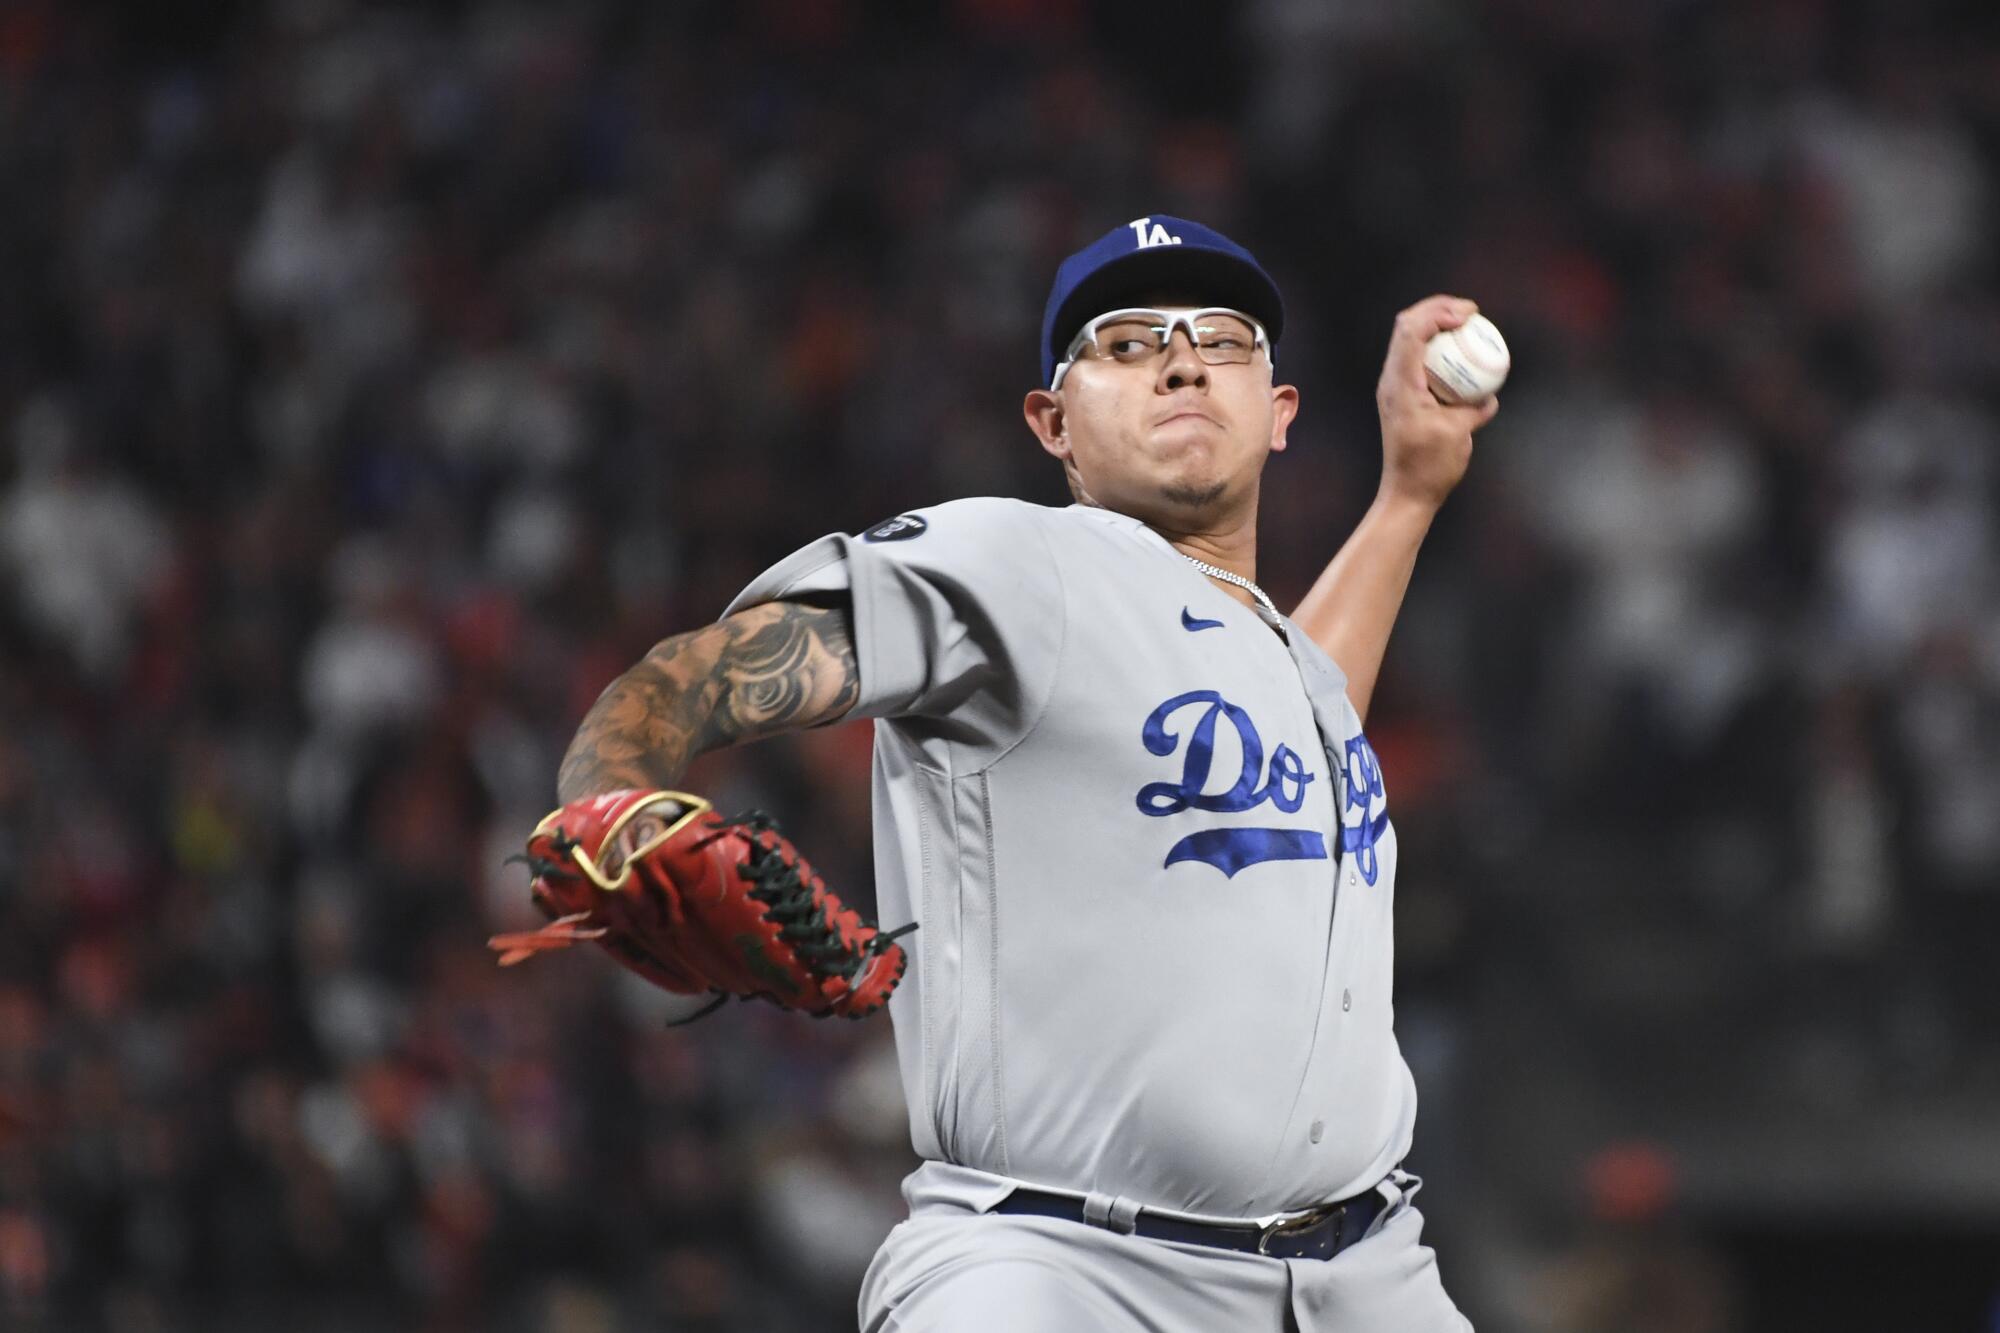  Julio Urias pitches for the Dodgers against the San Francisco Giants.